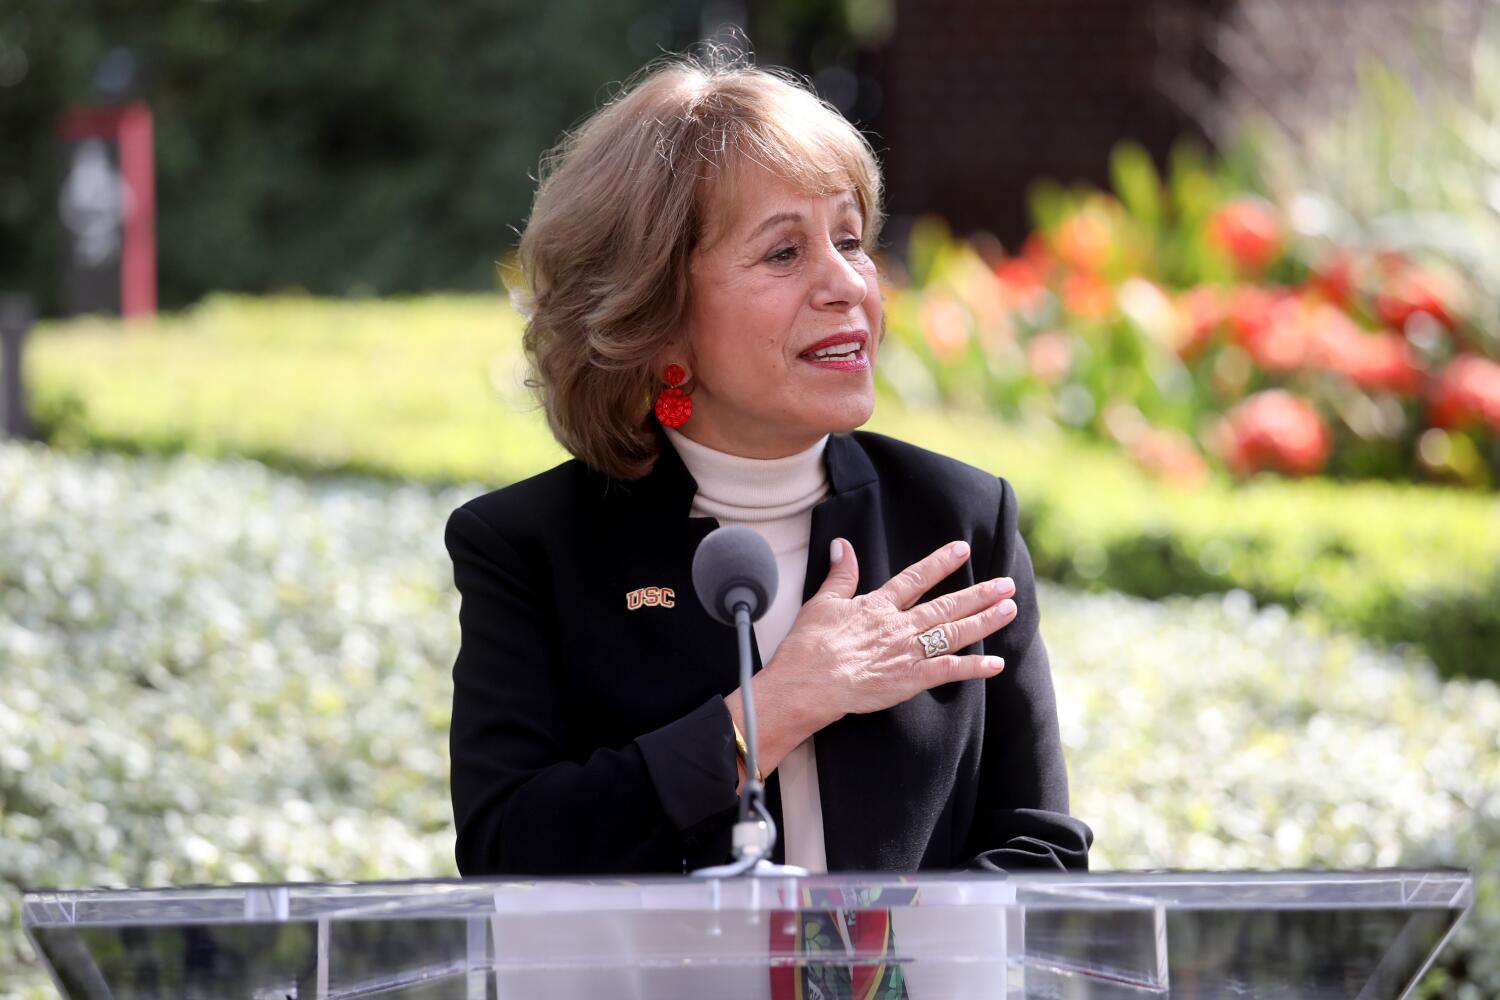 Image for display with article titled USC's Faculty Senate Censures President Carol Folt and Provost Over Commencement